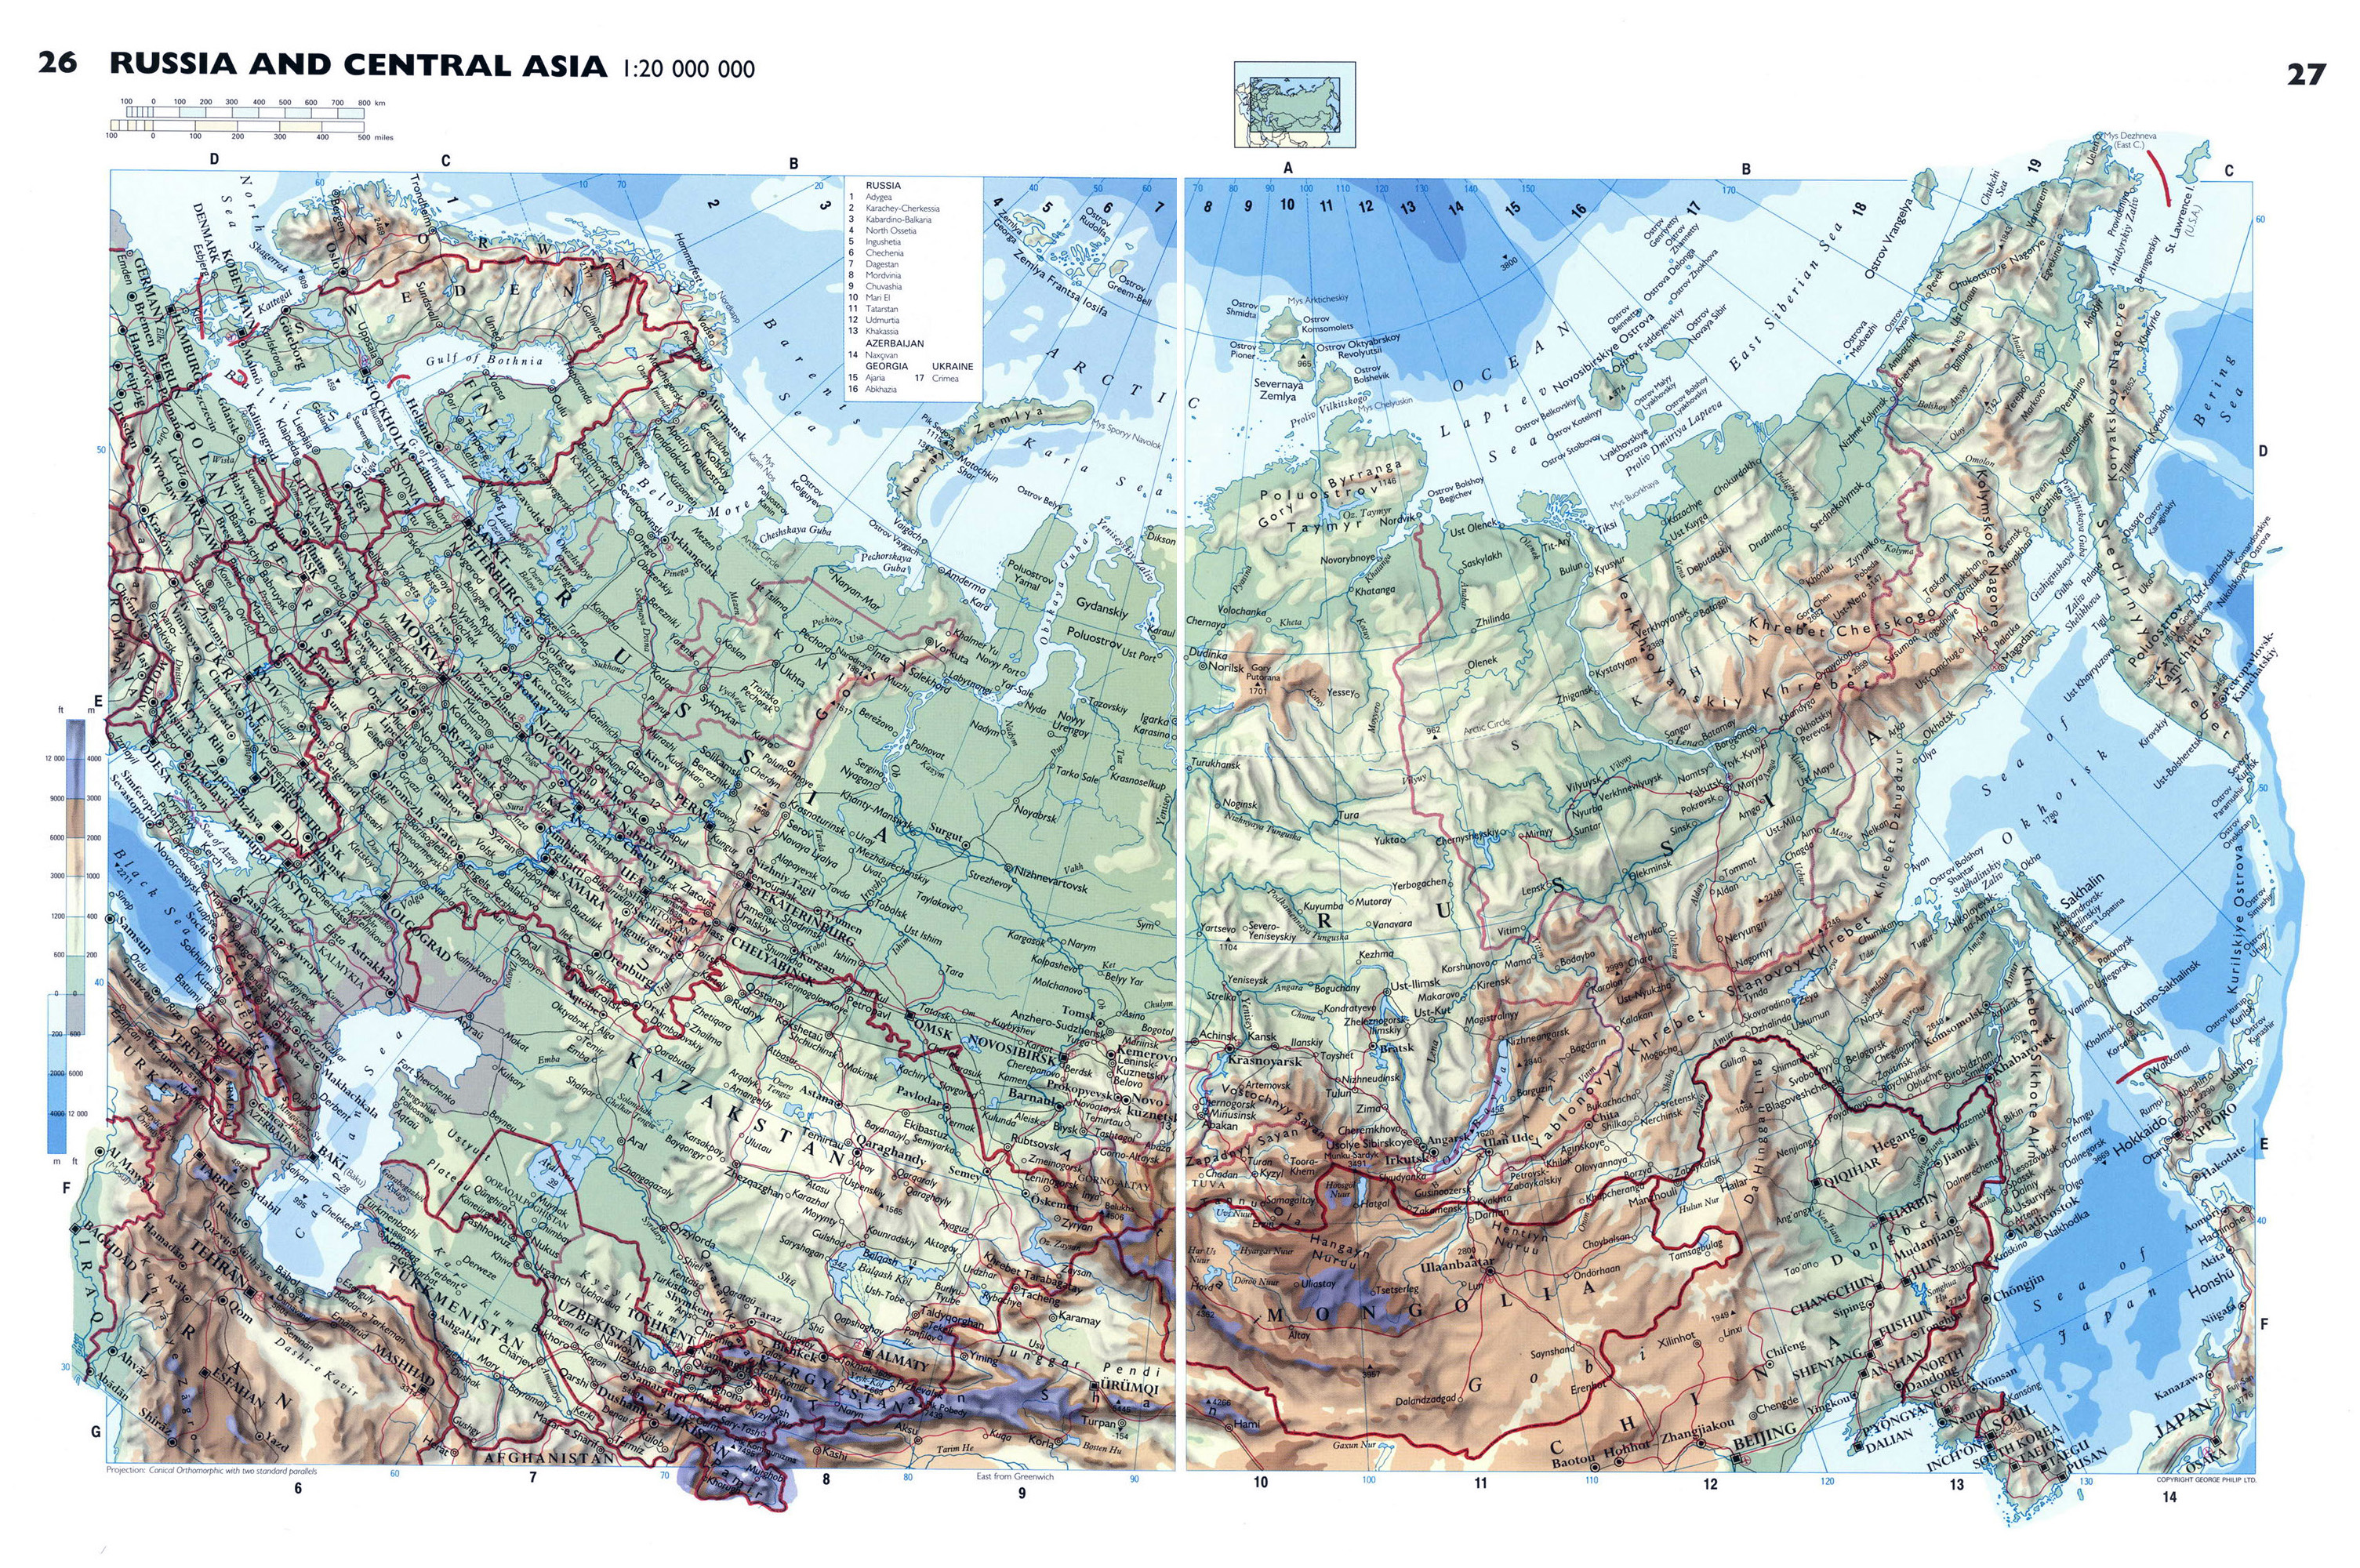 physical map of russia and surrounding countries